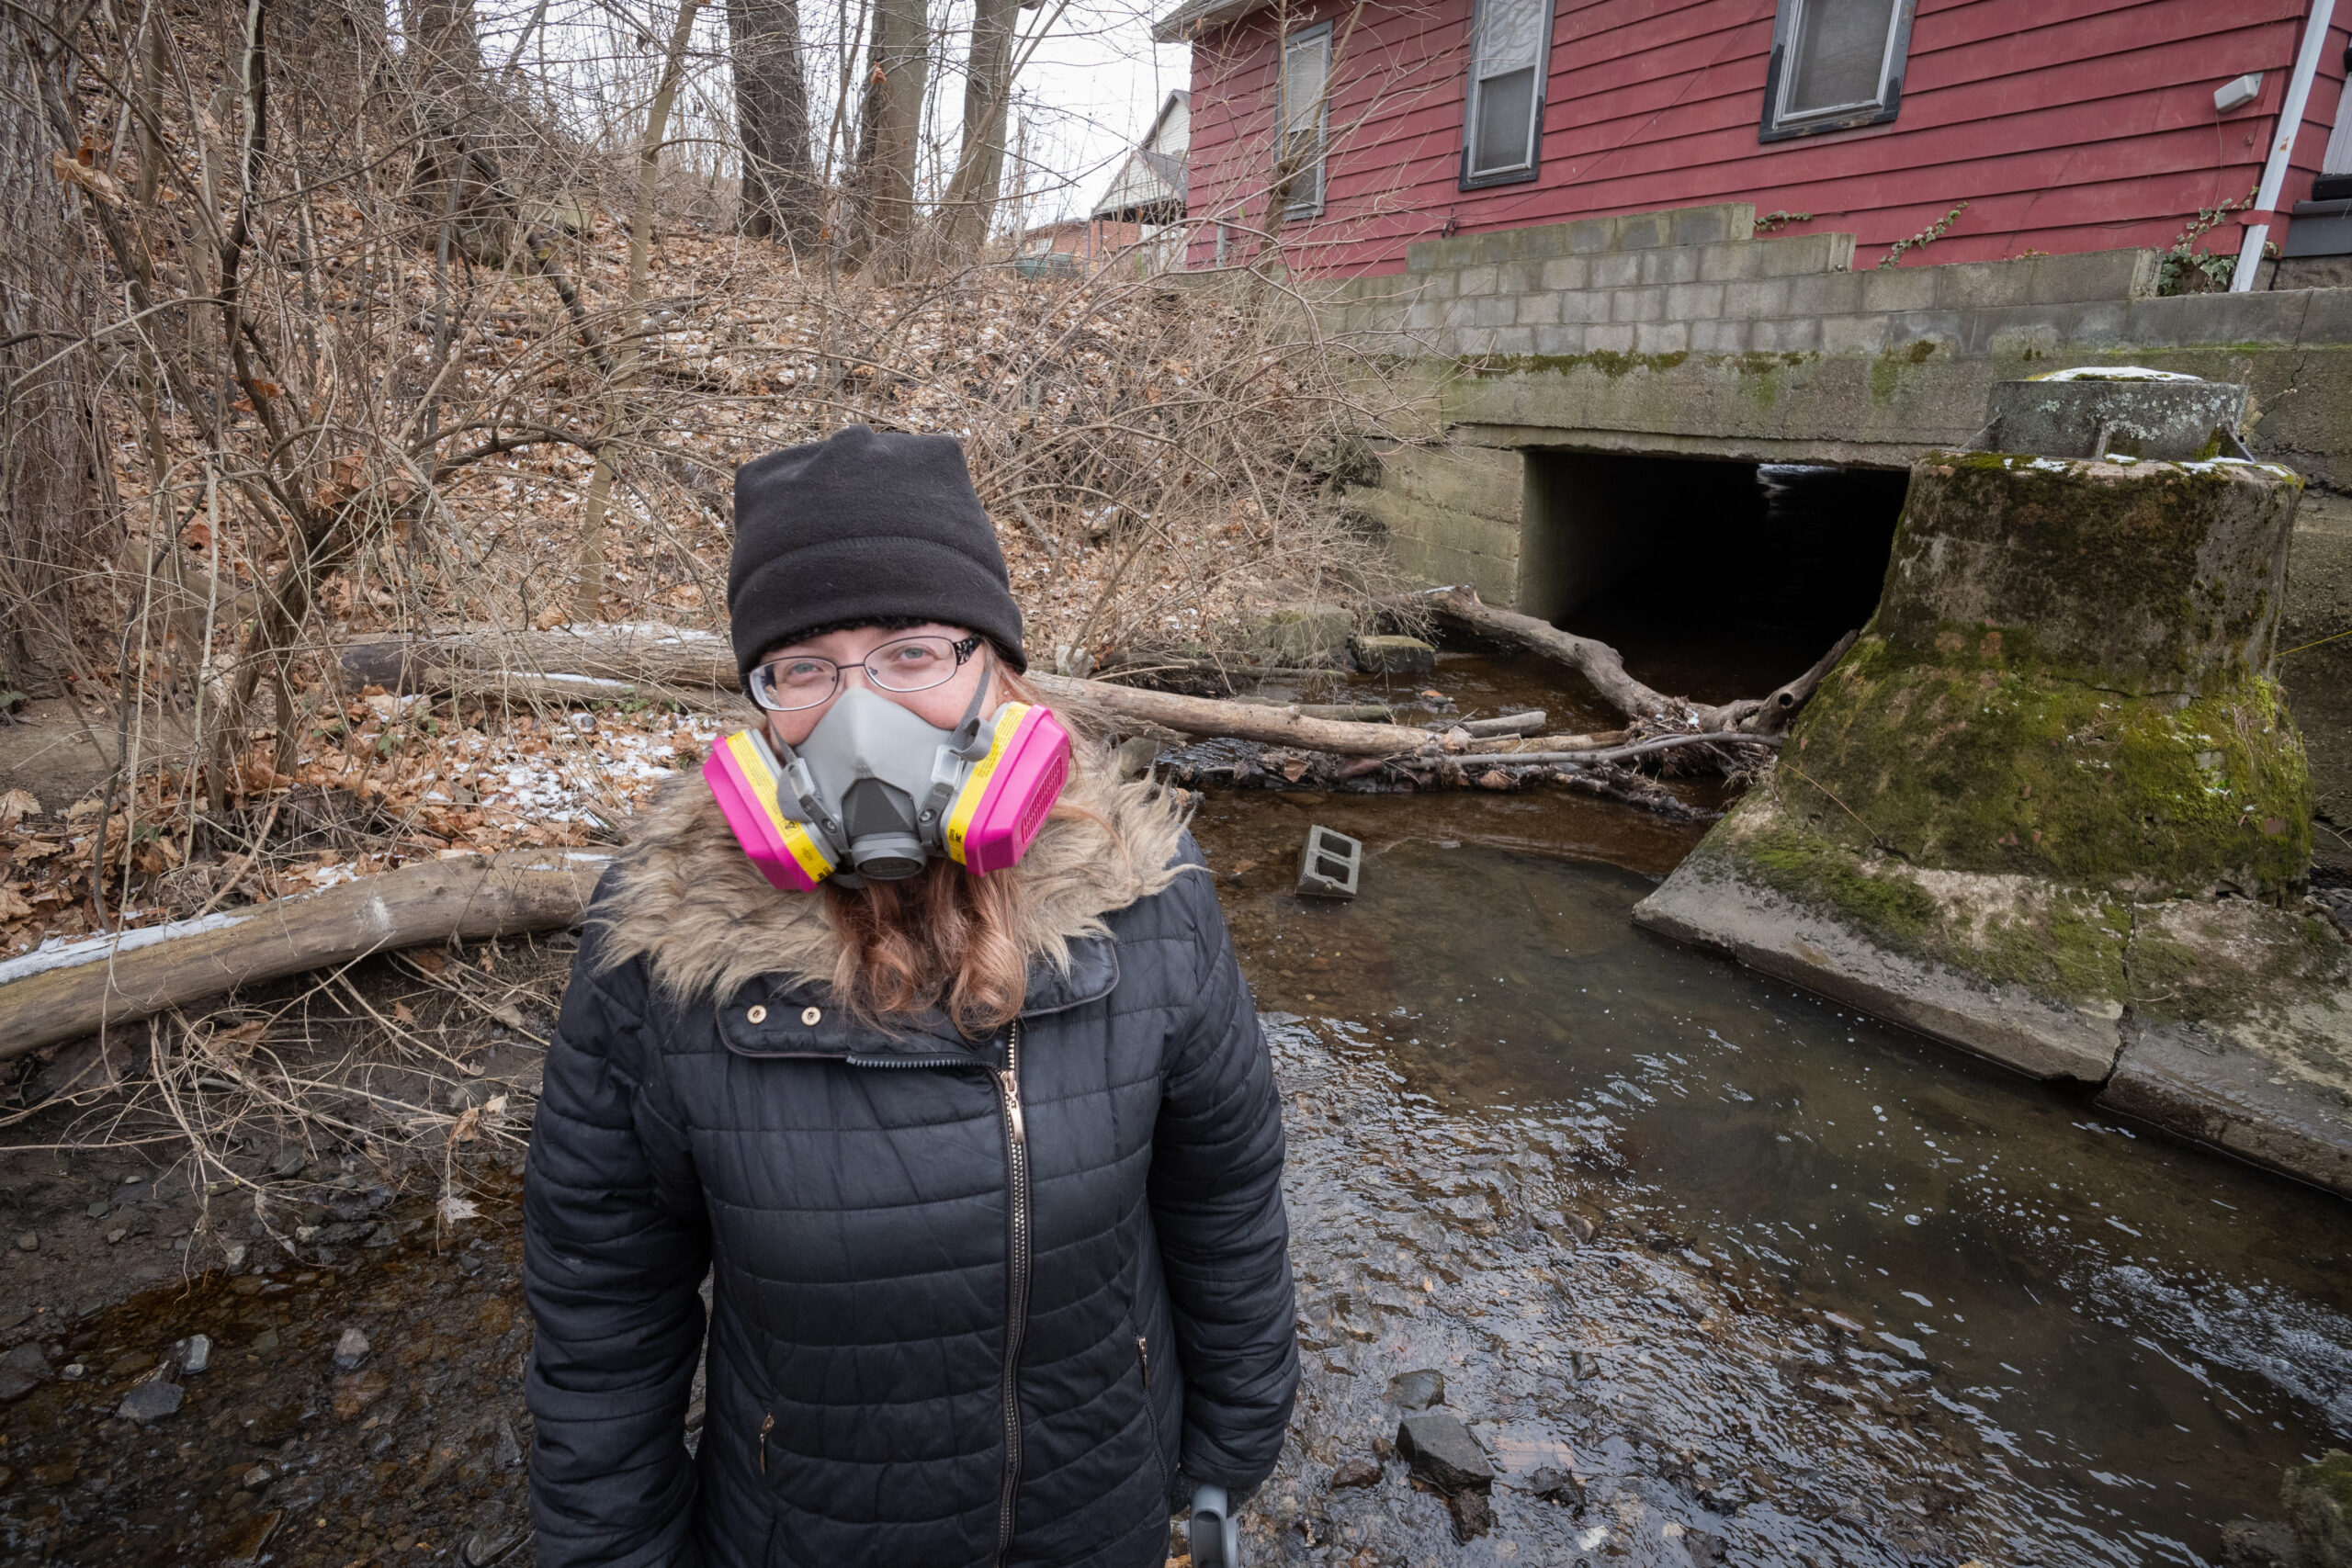 A woman stands in a stream in front of a culvert going under a home. She is wearing a winter coat and hat with a respirator.